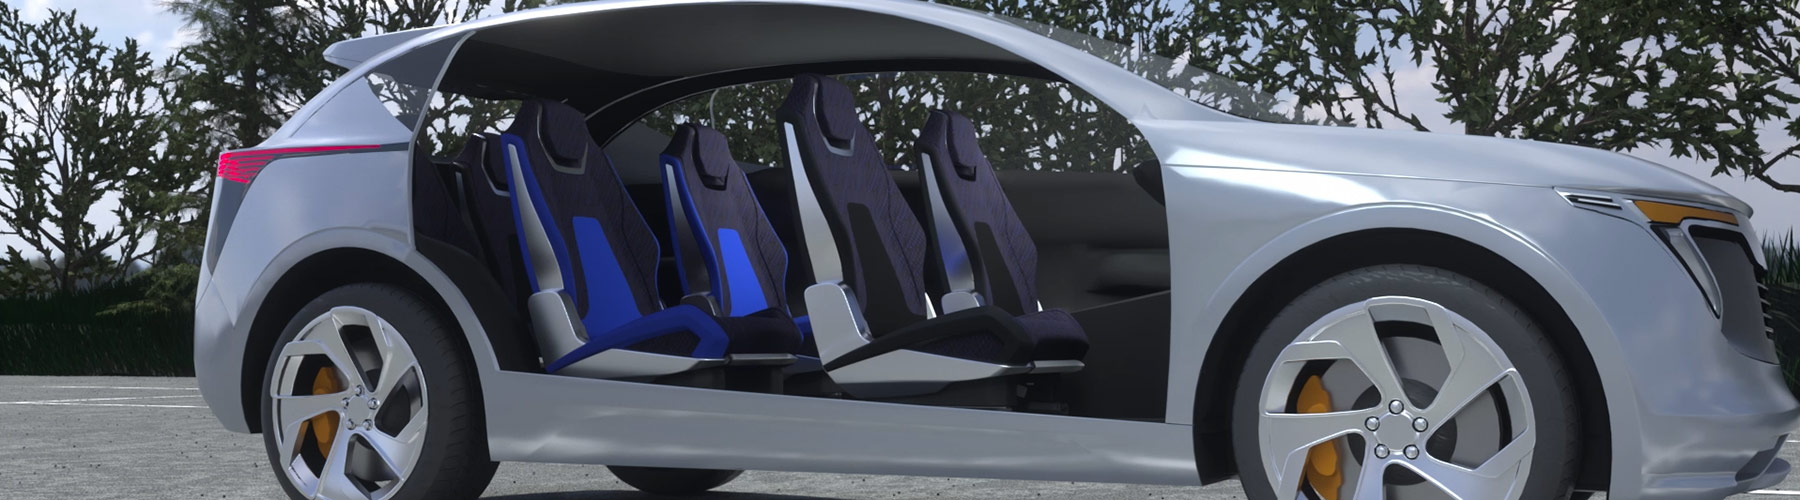 Interior view of a vehicle with Next Gen EZ Entry Seats